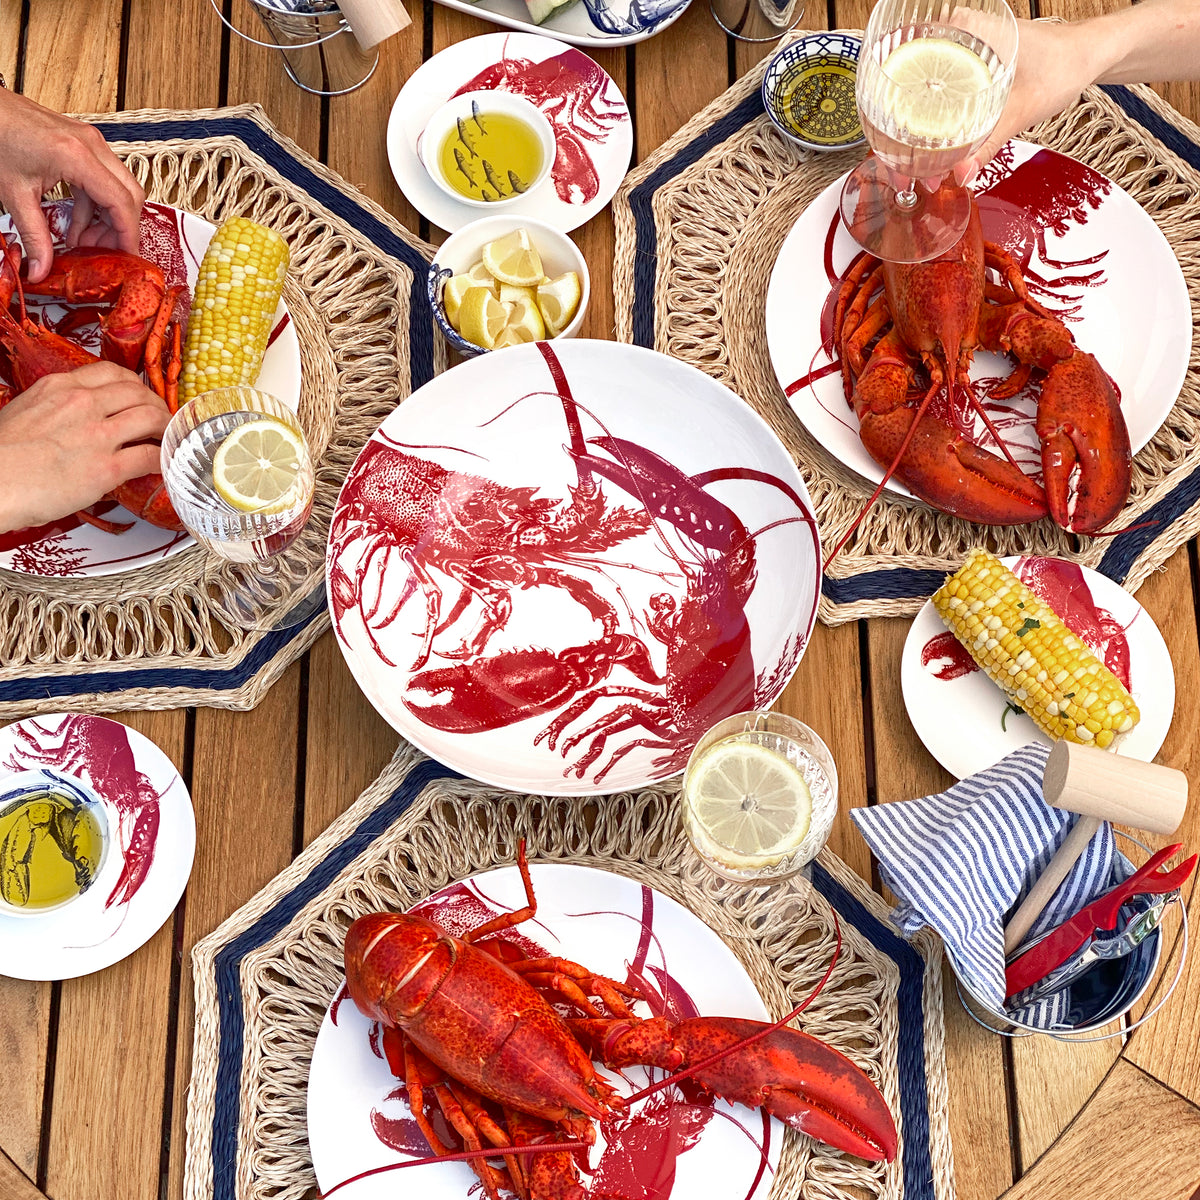 A table with four place settings features Caskata Artisanal Home Lobster Red Small Plates adorned with lobsters, corn on the cob, lemon wedges, glasses of lemon water, and a bowl with melted butter. Two hands are seen holding lobster meat and a drink. The heirloom-quality dinnerware evokes a charming seaside style perfect for any coastal gathering.